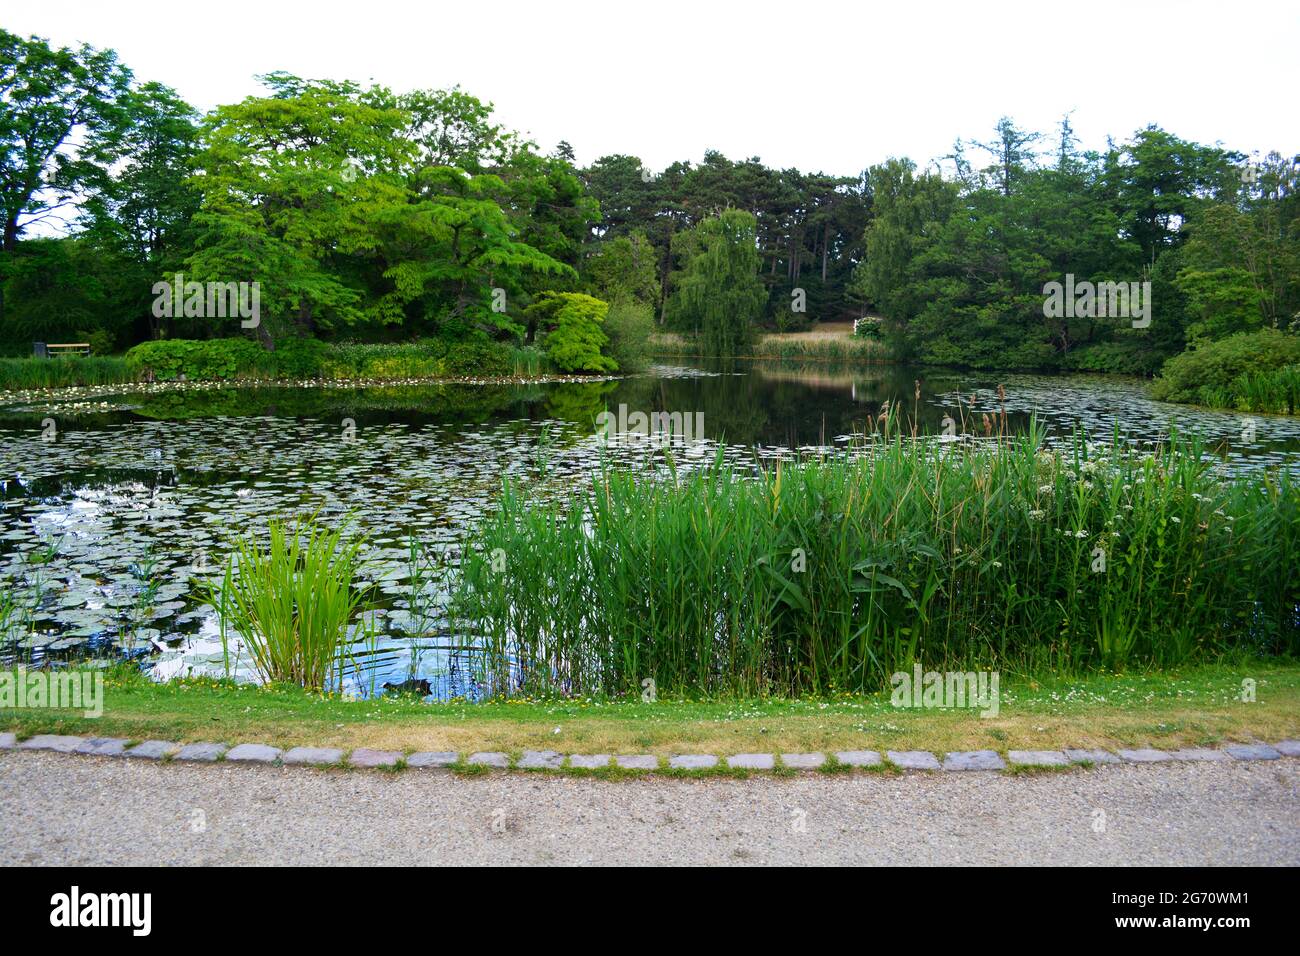 Hollywood Gå op Lager Copenhagen, Denmark - July 2021: Beautiful nature, trees and plants at the  open area of The University of Copenhagen Botanical Garden Stock Photo -  Alamy